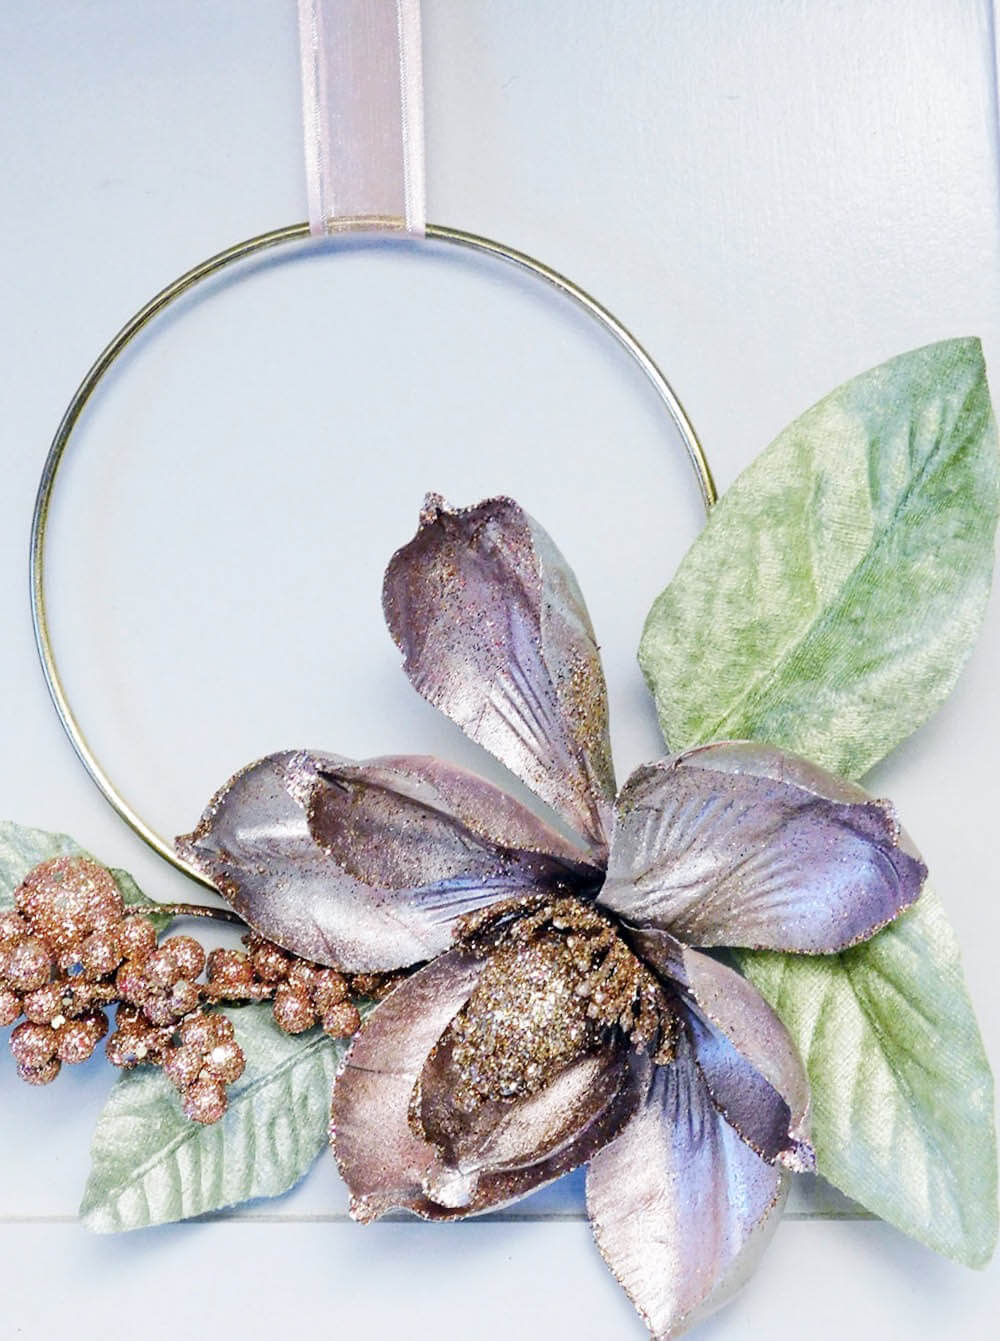 Diy this easy blush pink hoop ring wreath for less than $5. Great Idea for decorating on a budget.